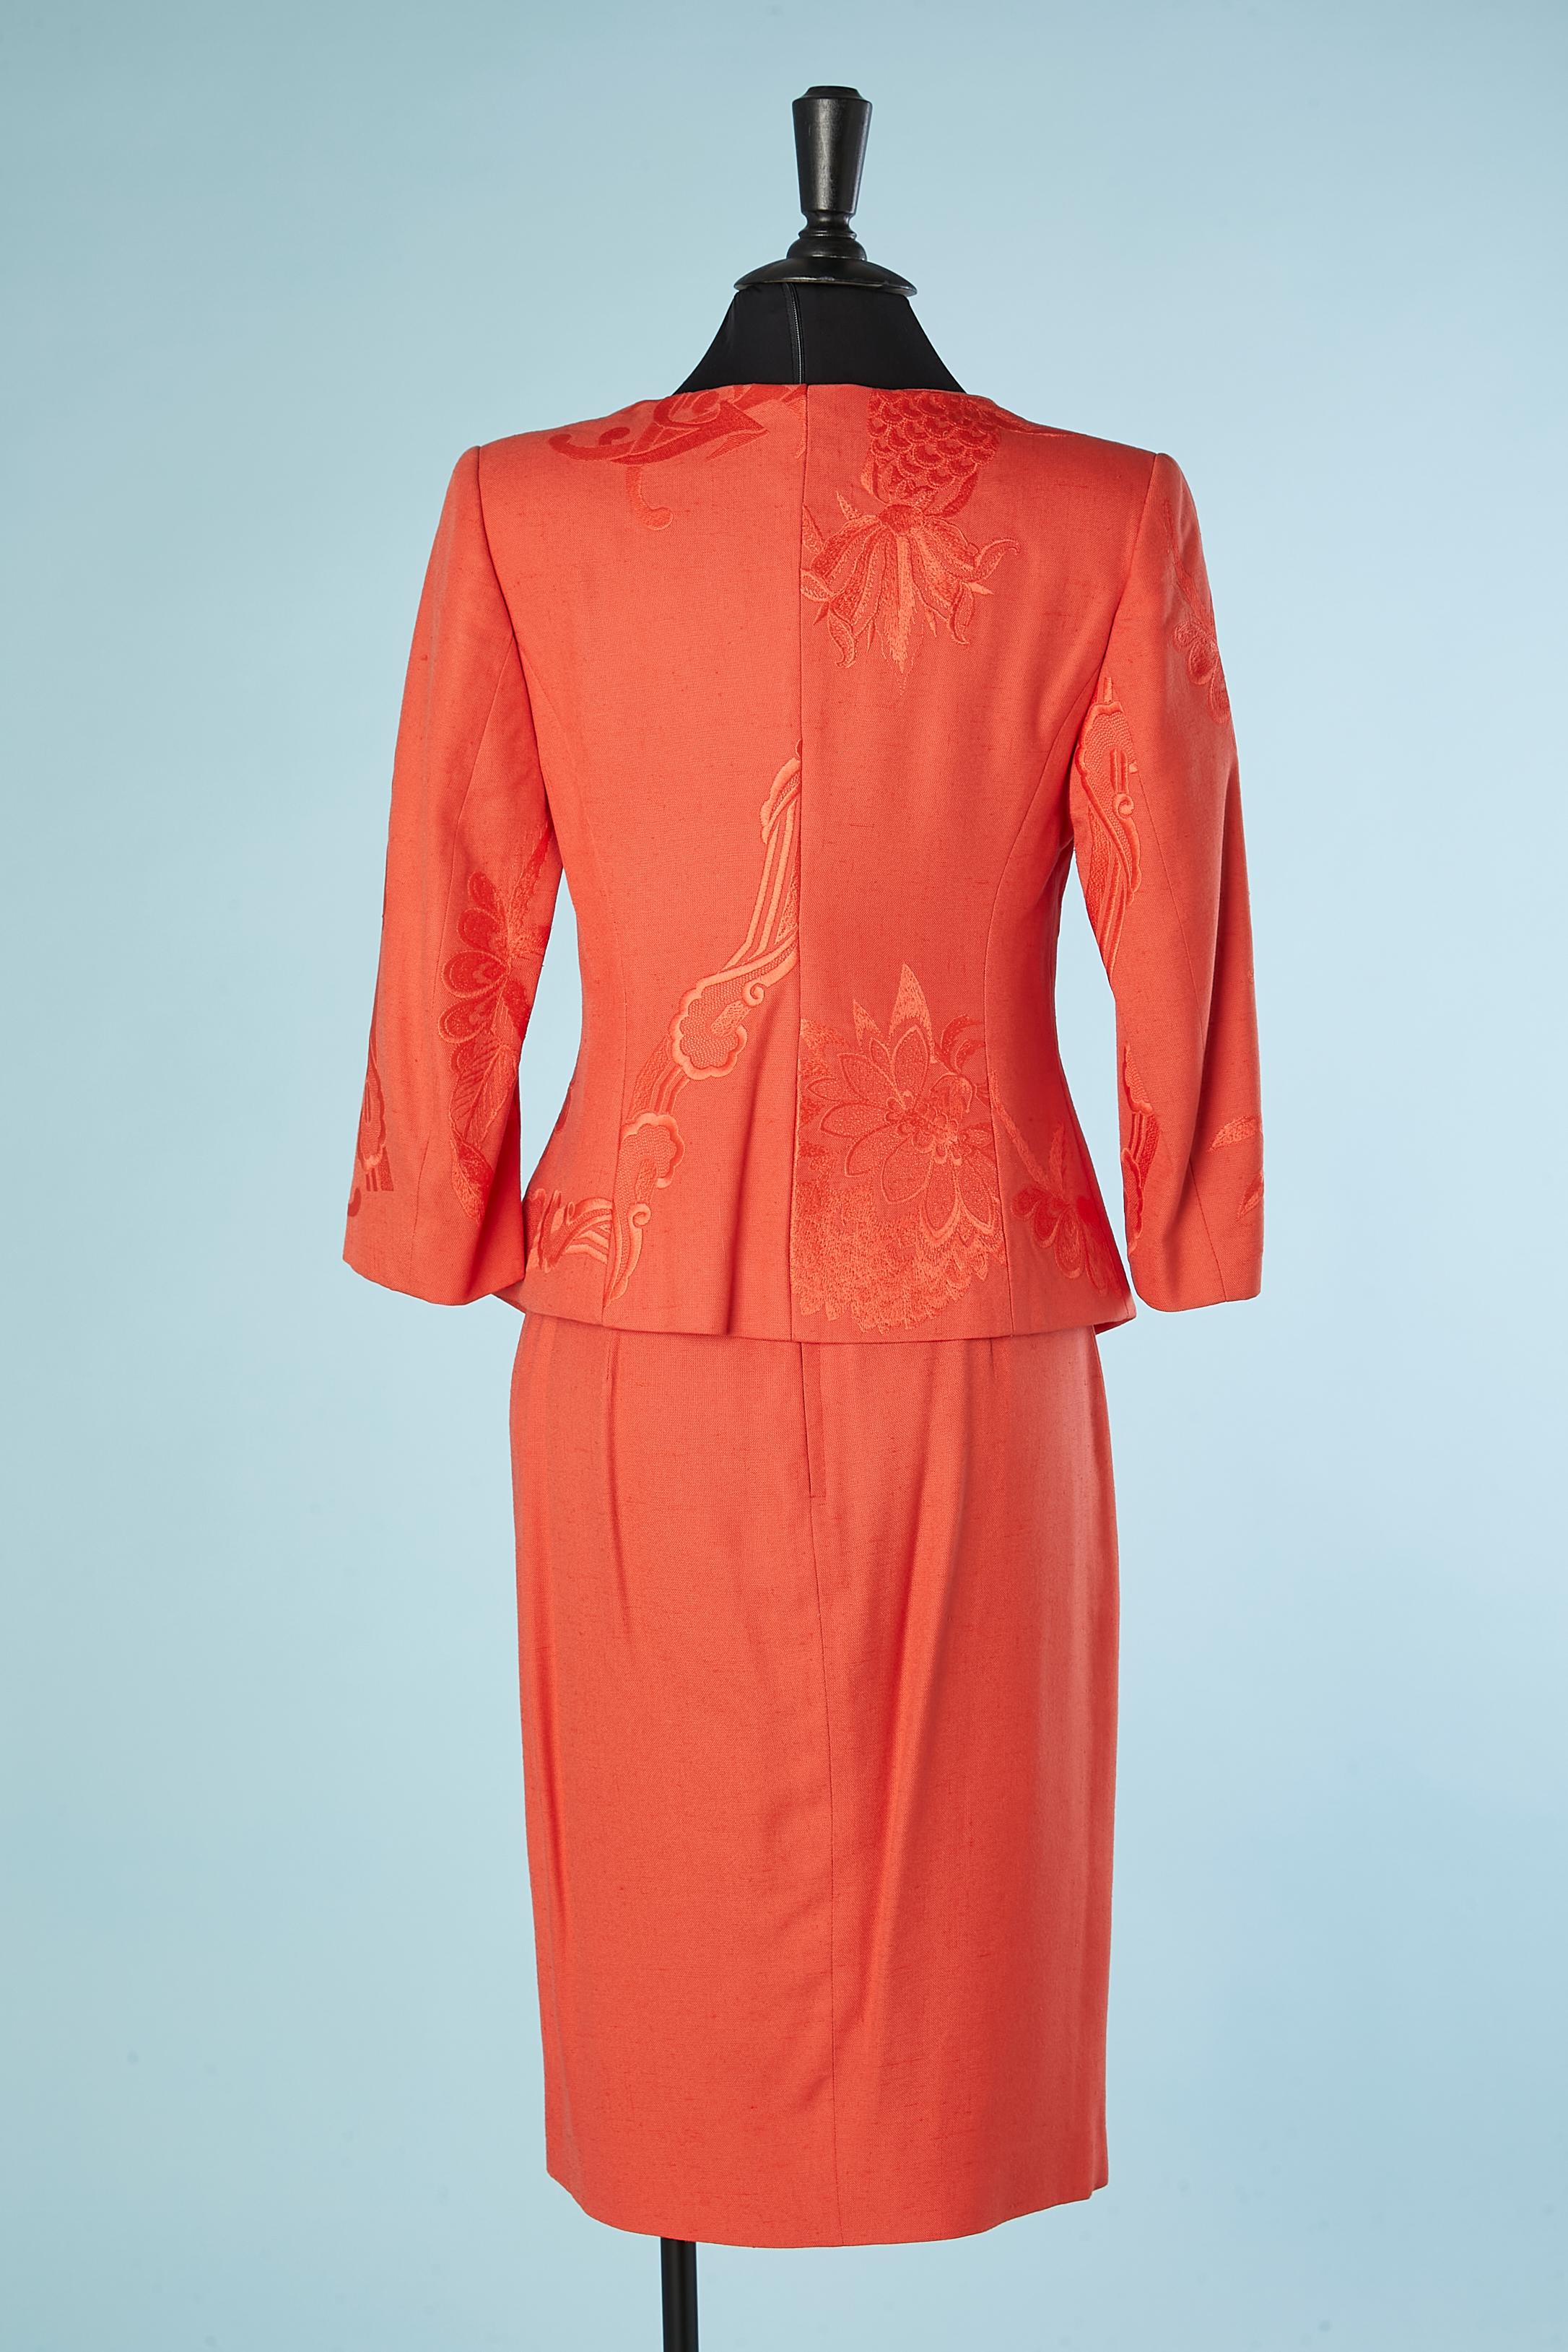 Corral linen skirt suit with tone on tone thread embroideries Gianfranco Ferré  For Sale 1